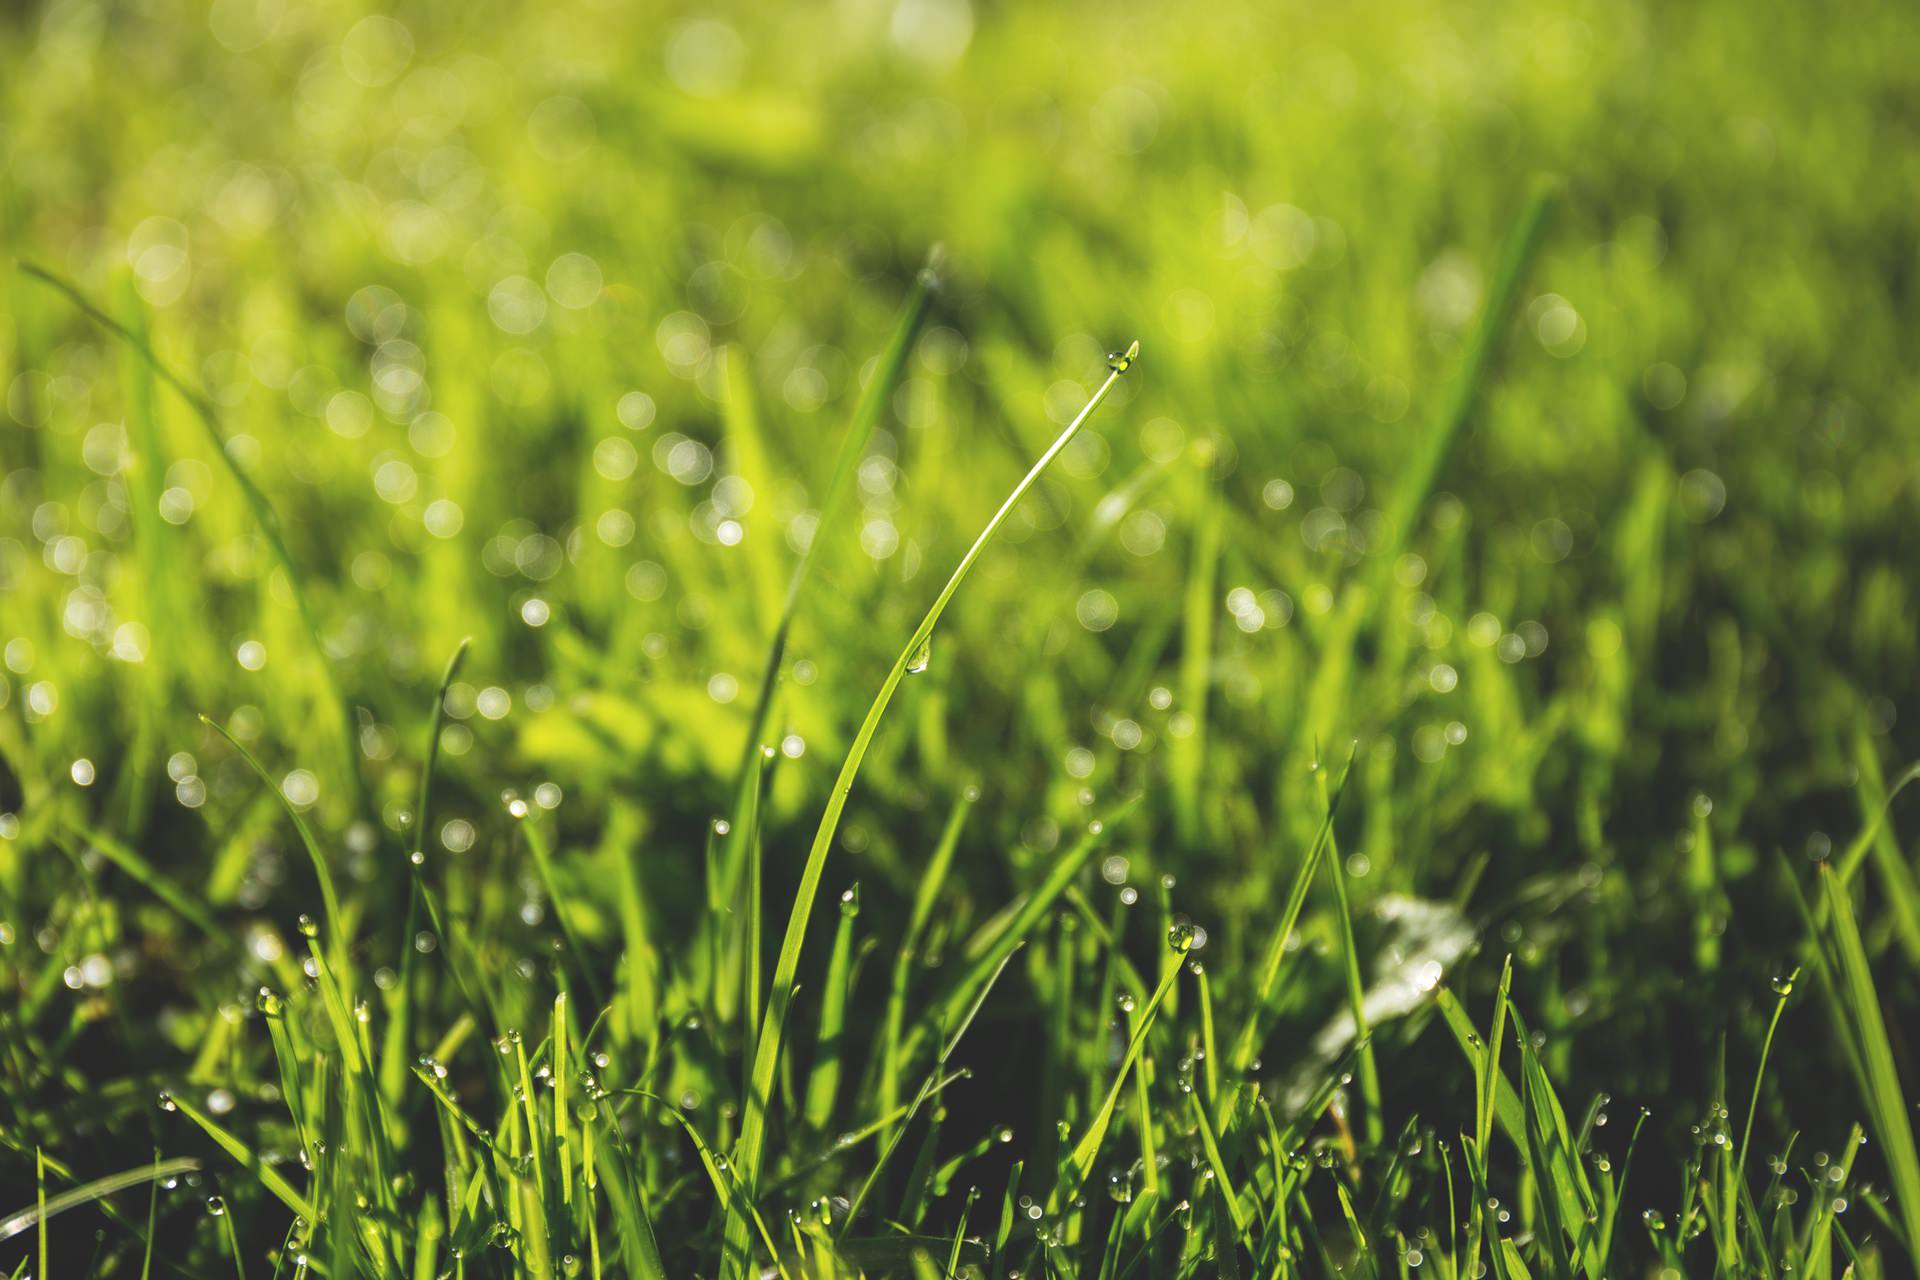 Taking Care of Your Lawn Without Wasting Resources